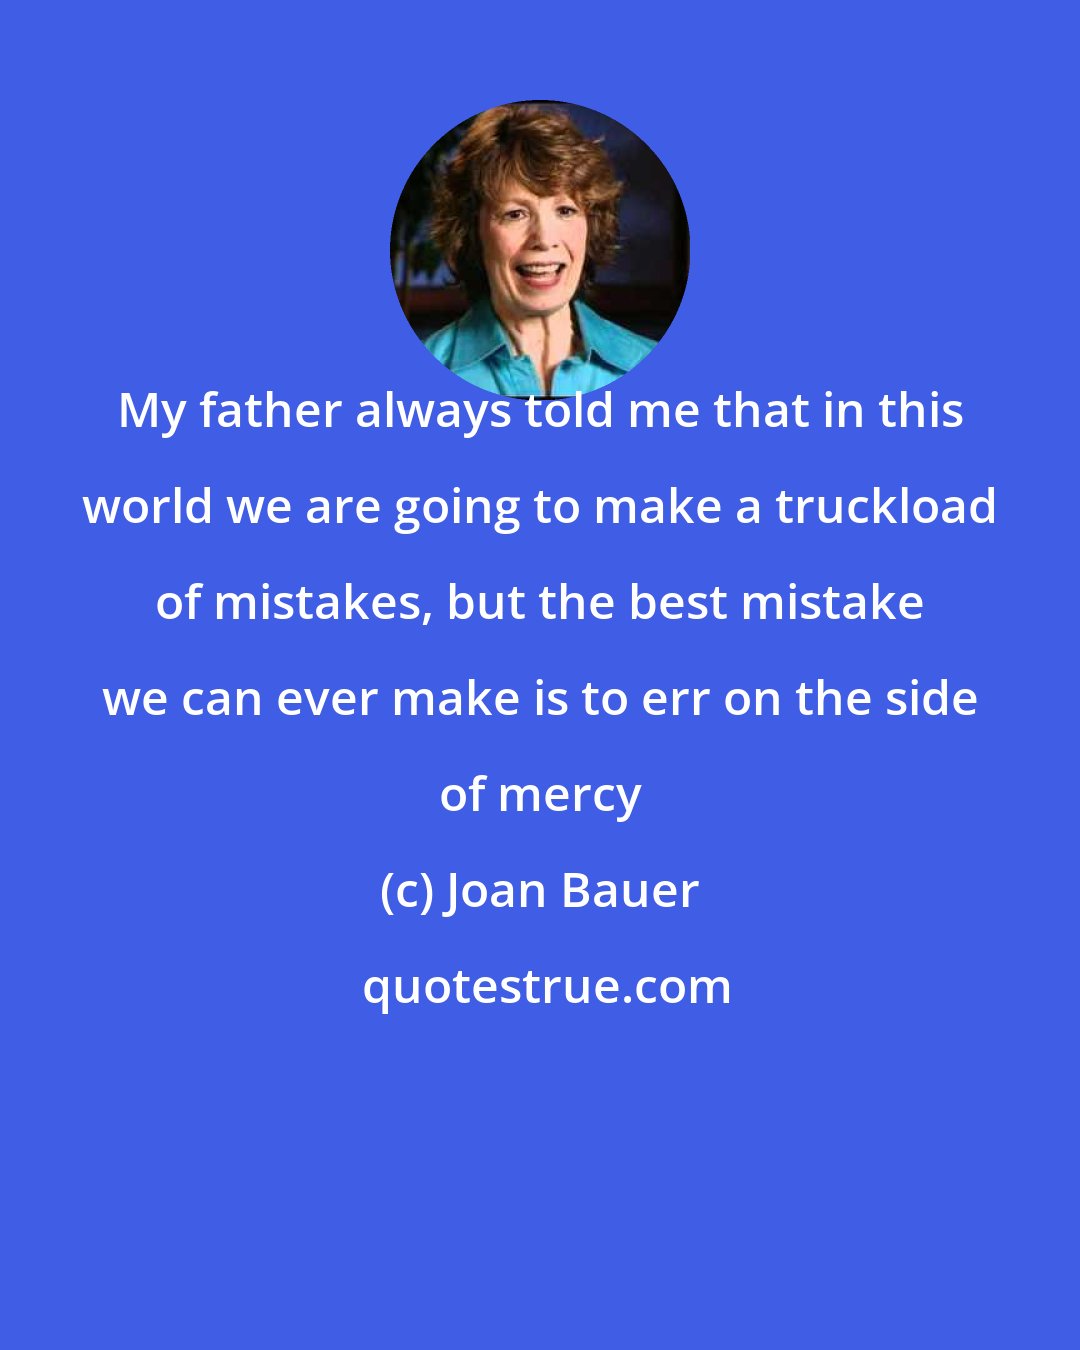 Joan Bauer: My father always told me that in this world we are going to make a truckload of mistakes, but the best mistake we can ever make is to err on the side of mercy